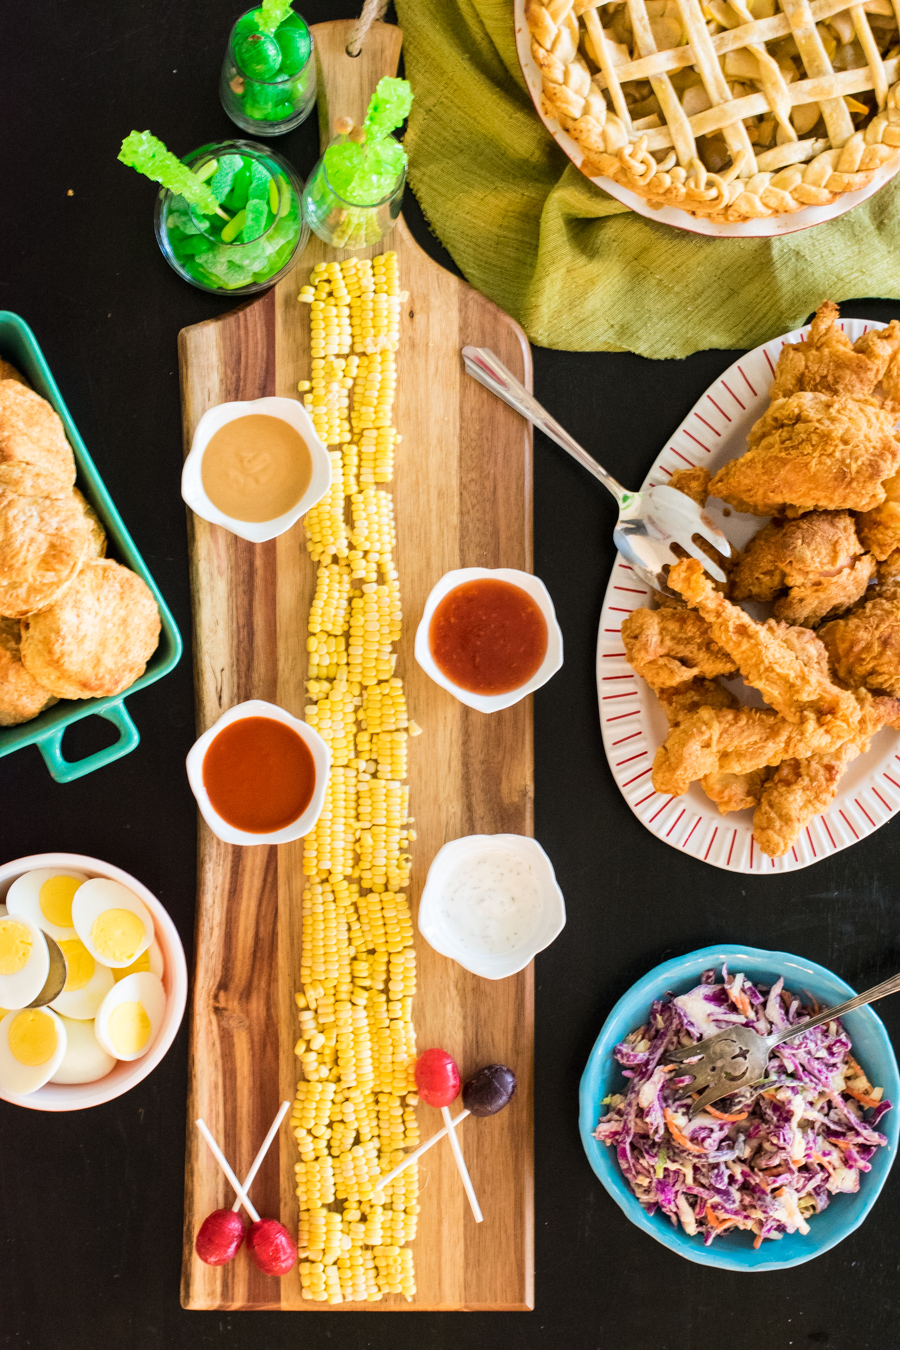 Overhead shot of a table full of food for a Wizard of Oz dinner menu. Yellow Brick Road made of corn kernels in the center, surrounded by lollipops, fried chicken, dips, cole slaw, hard boiled eggs, and baking powder biscuits